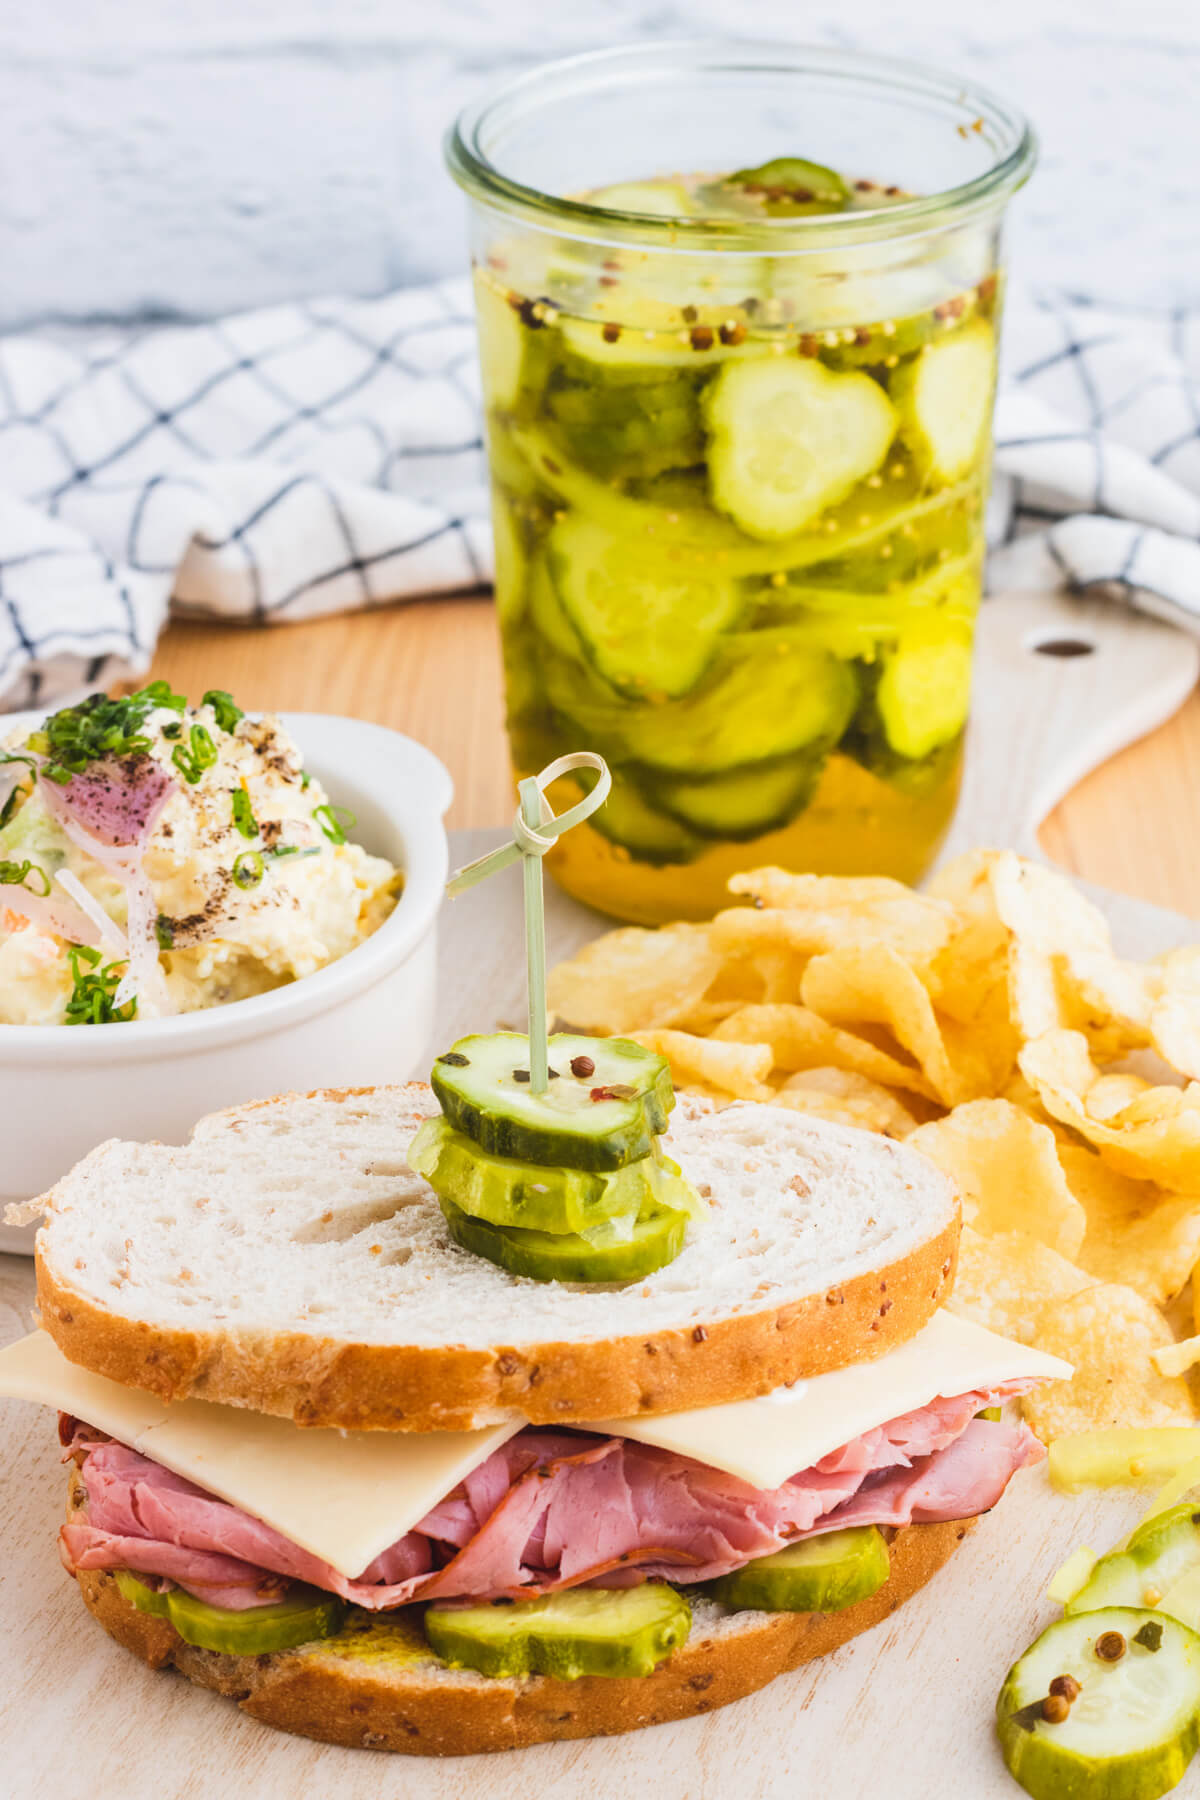 A table set with a jar of Refrigerator Bread and Butter pickles, potato salad, potato chips, and a sandwich garnished with sliced pickles.